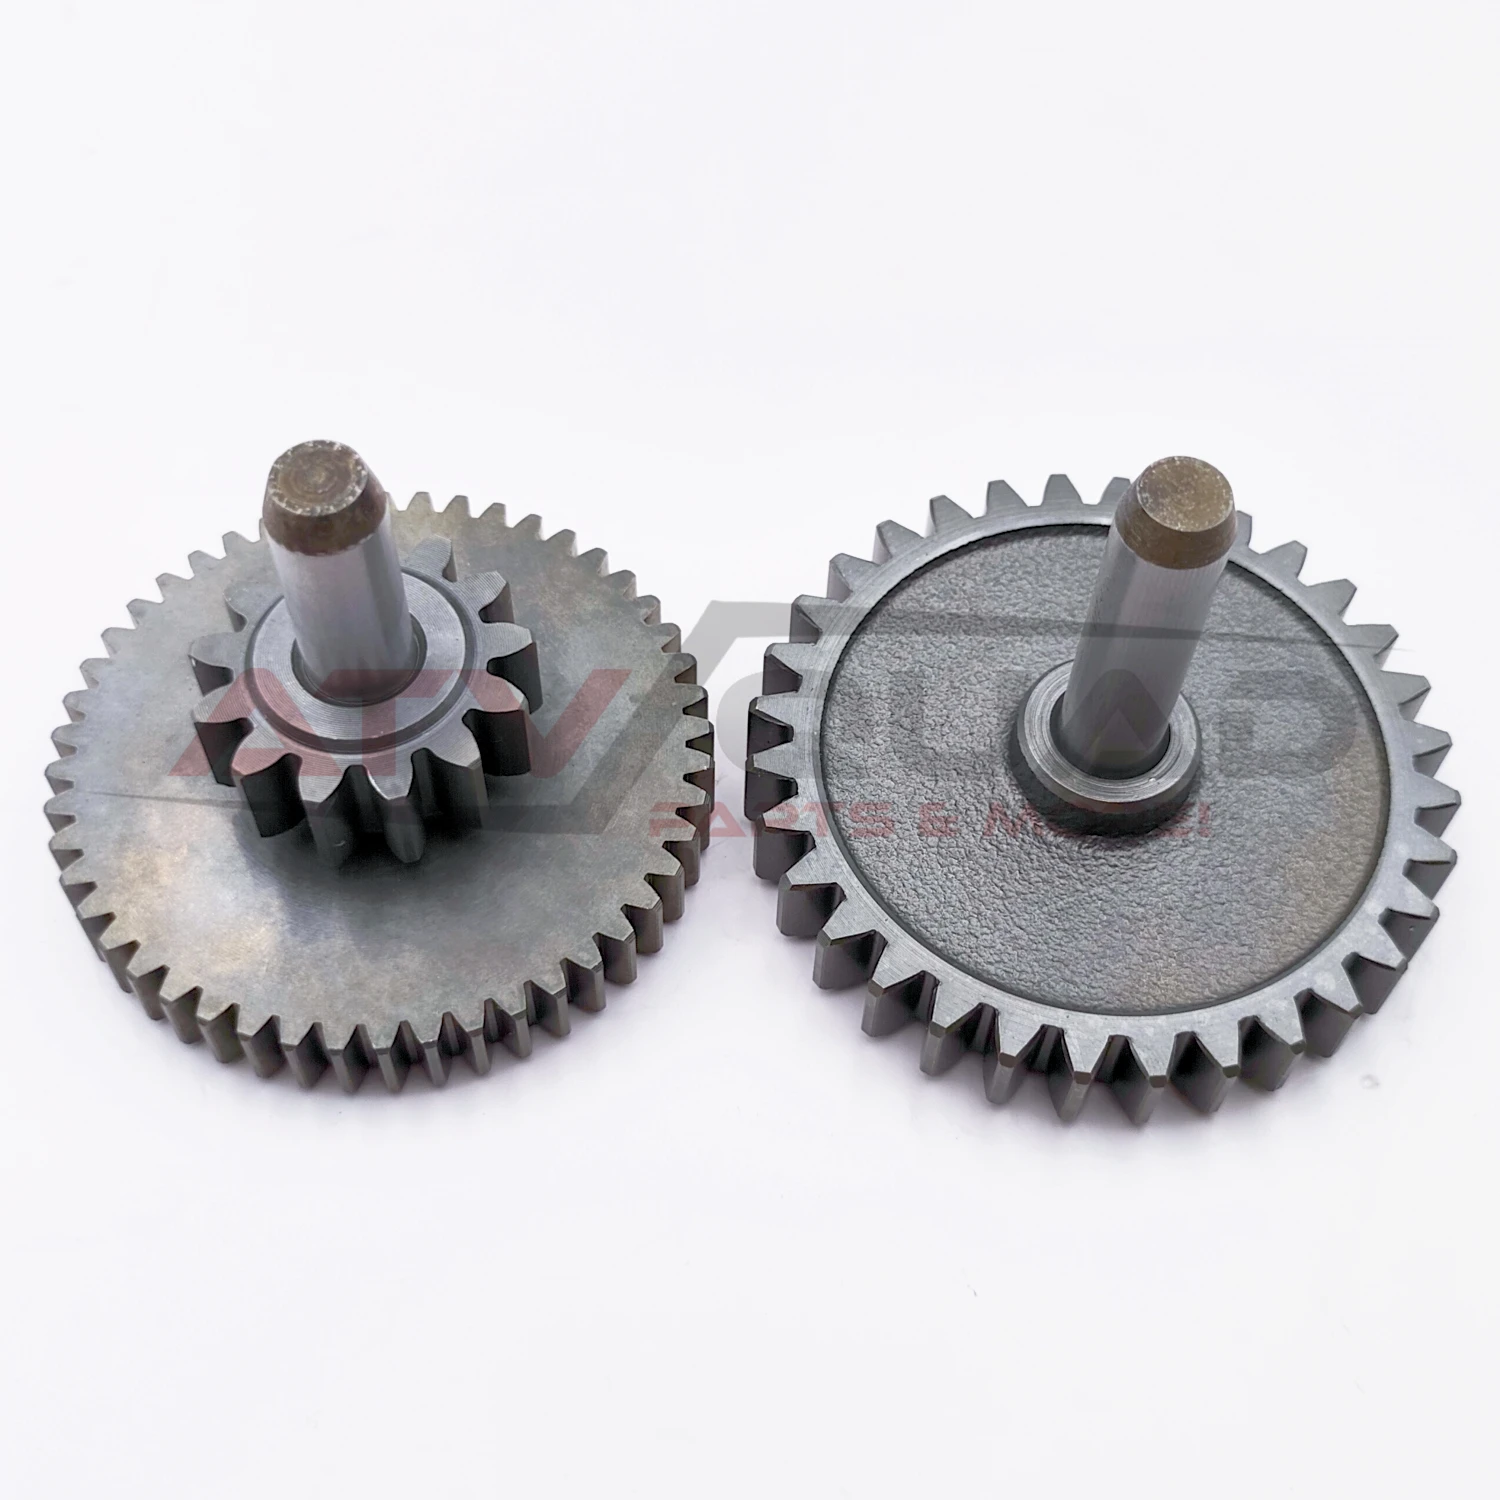 Middle Gear Dual Gear Breather Shaft Kit for for CFmoto 800 X8 U8 800 Trail Z8 800EX Z8-EX 0800-090002 0800-090003 0800-011202